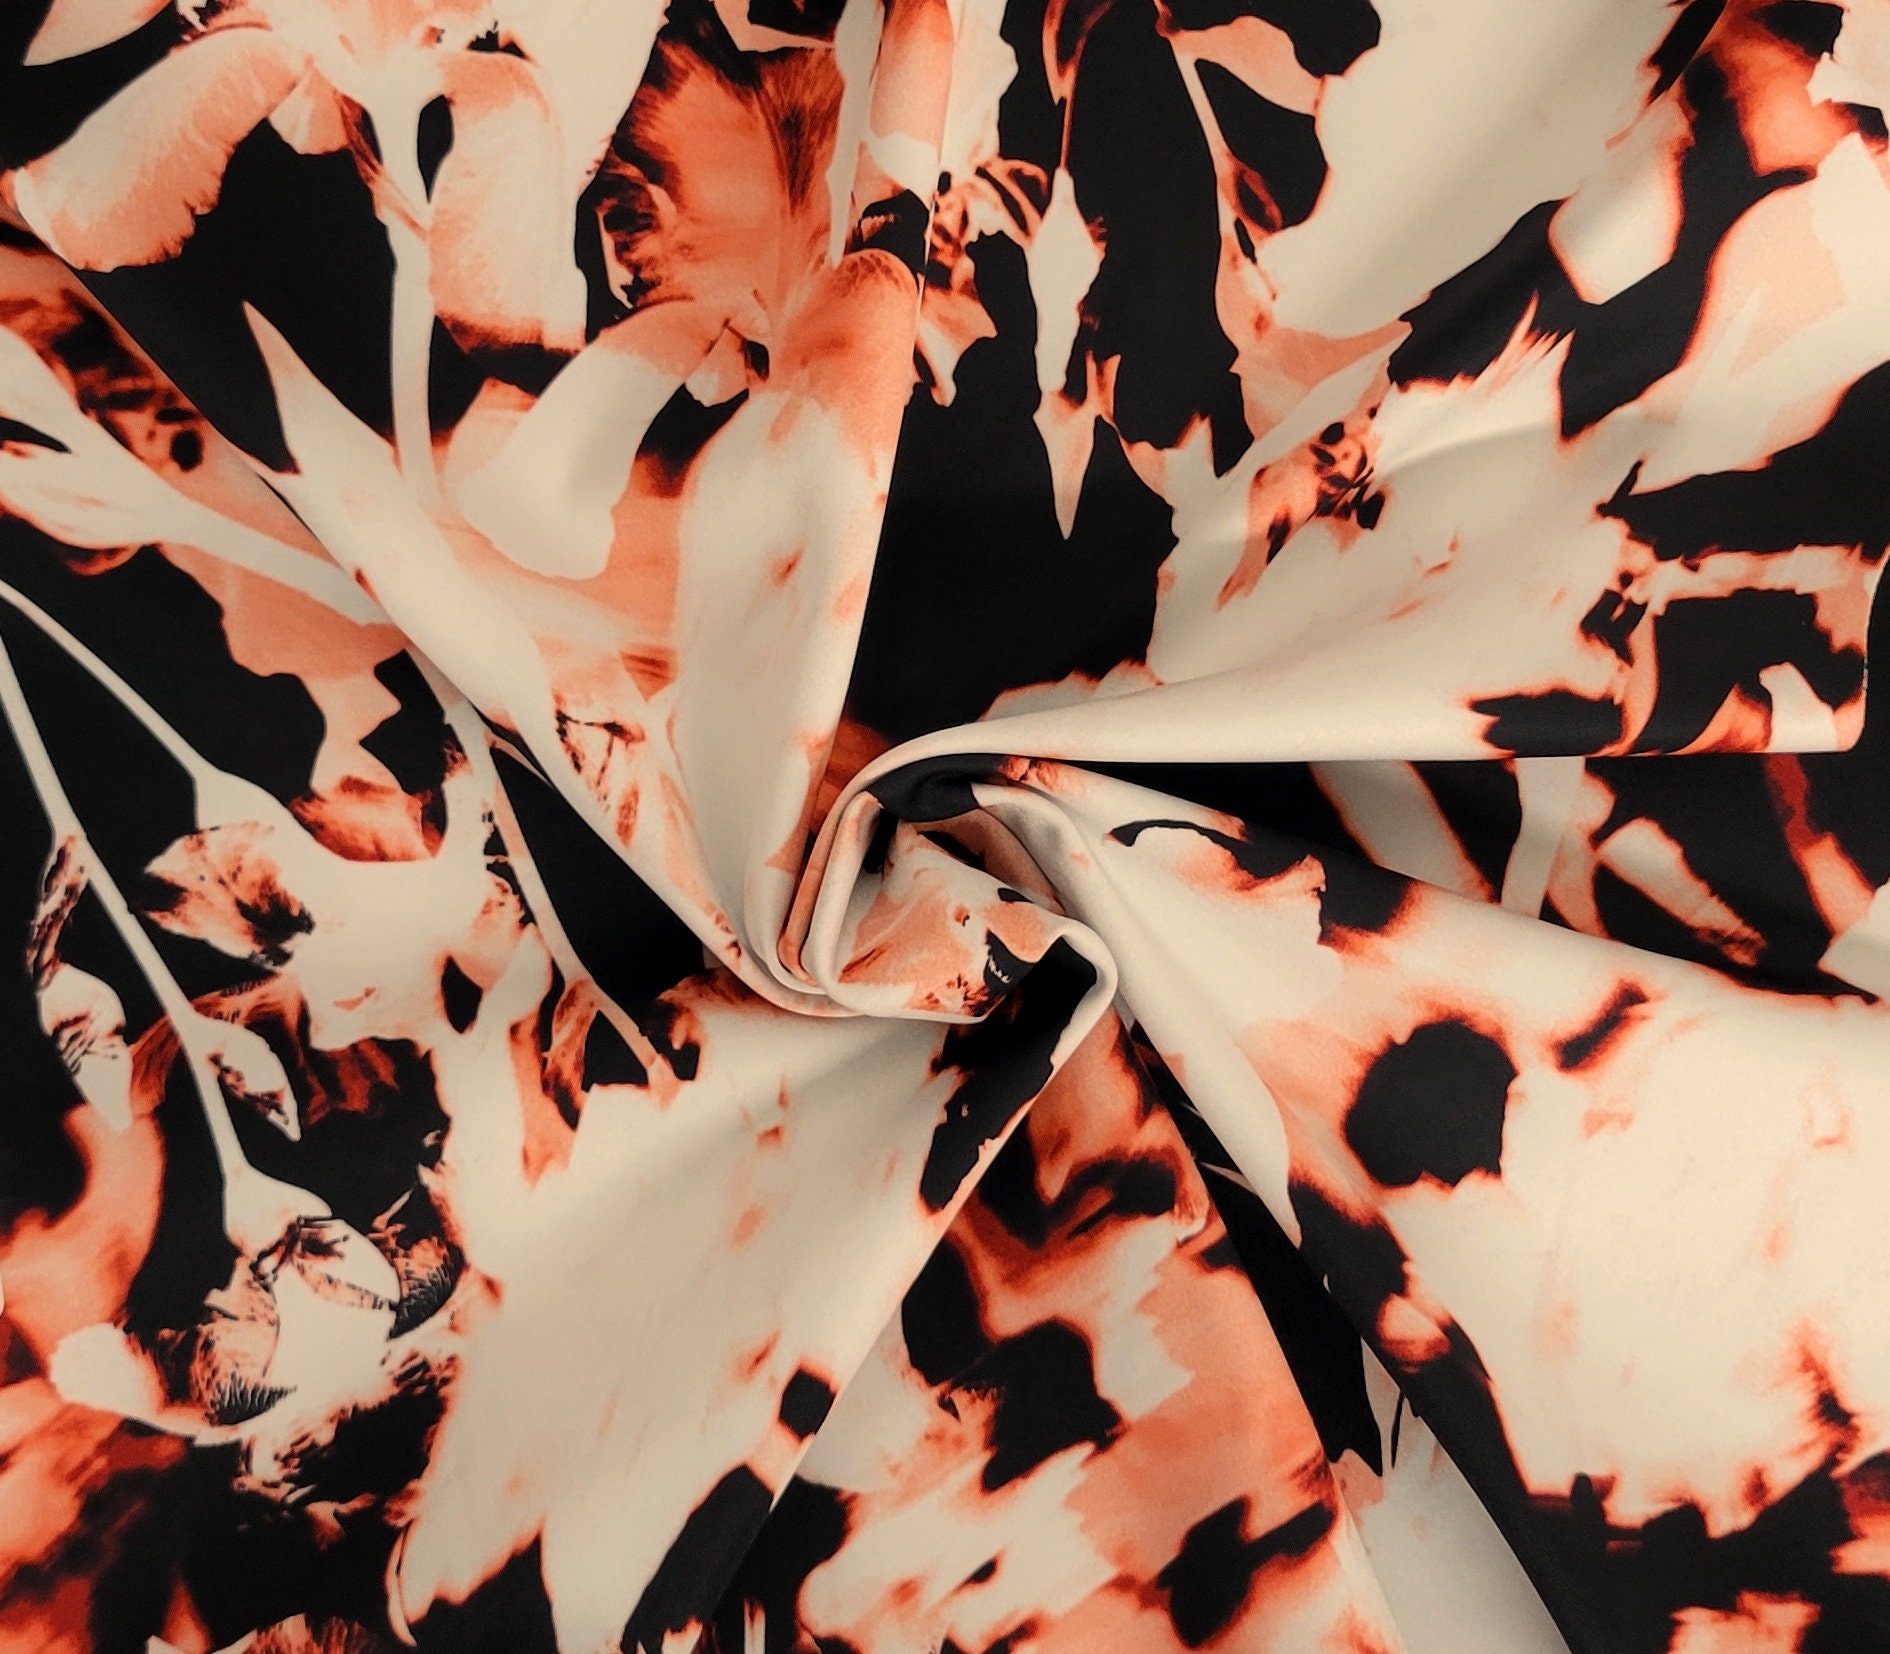 Fire Print Polyamide / Nylon Blend Spandex Activewear Performance Knit  Fabric by the Yard 4 Way Stretch 